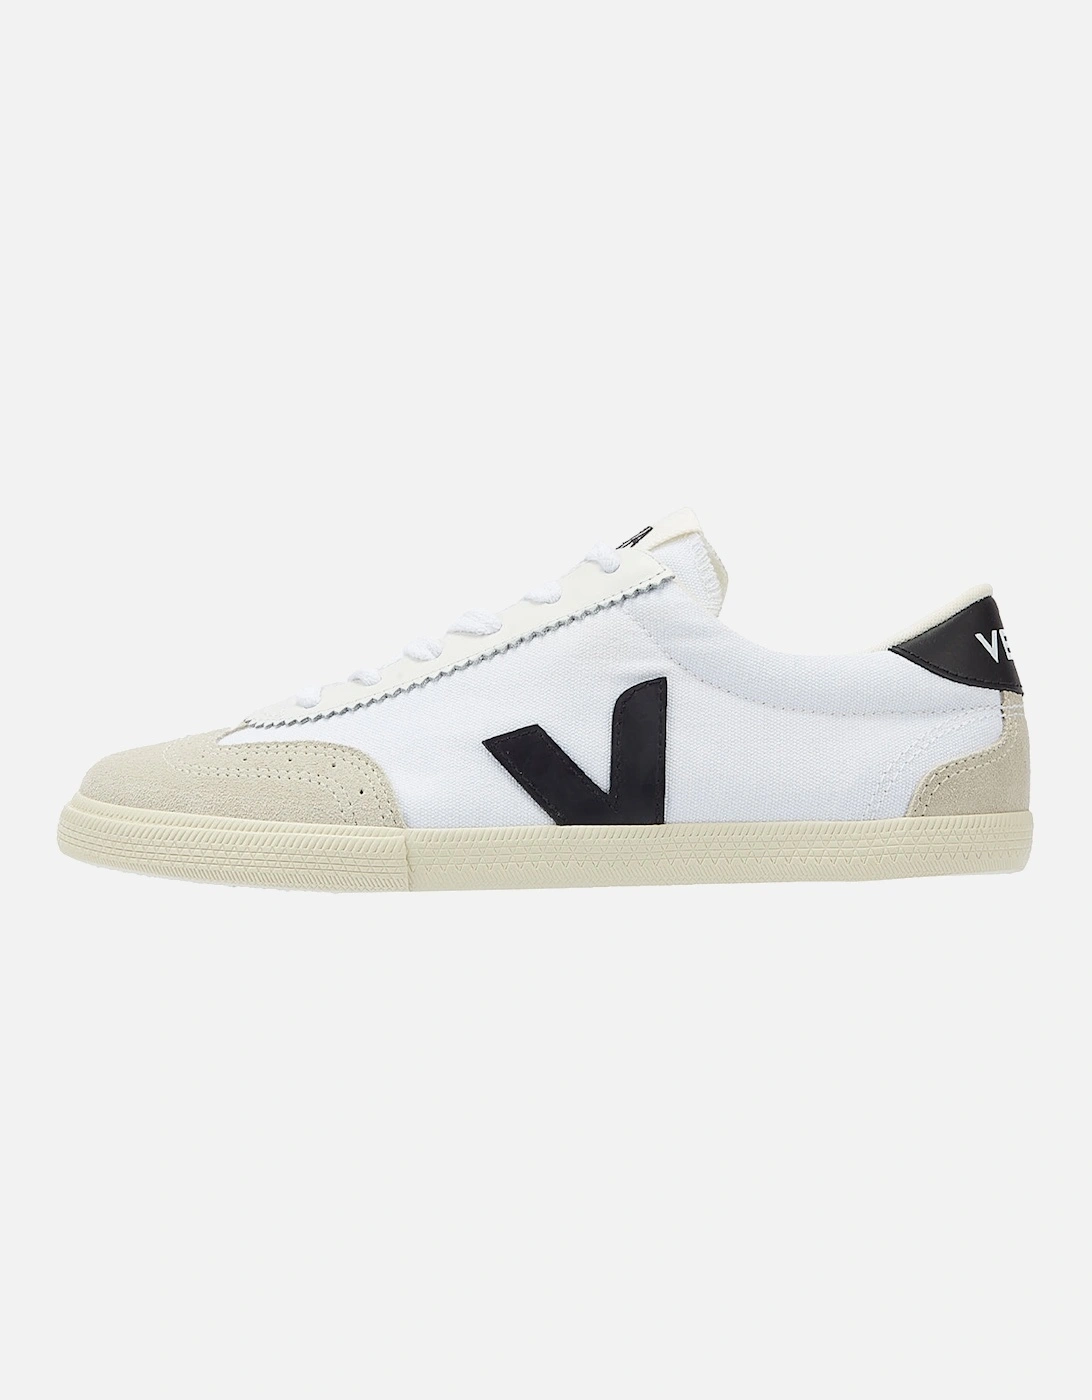 Volley Women's White/Black Trainers